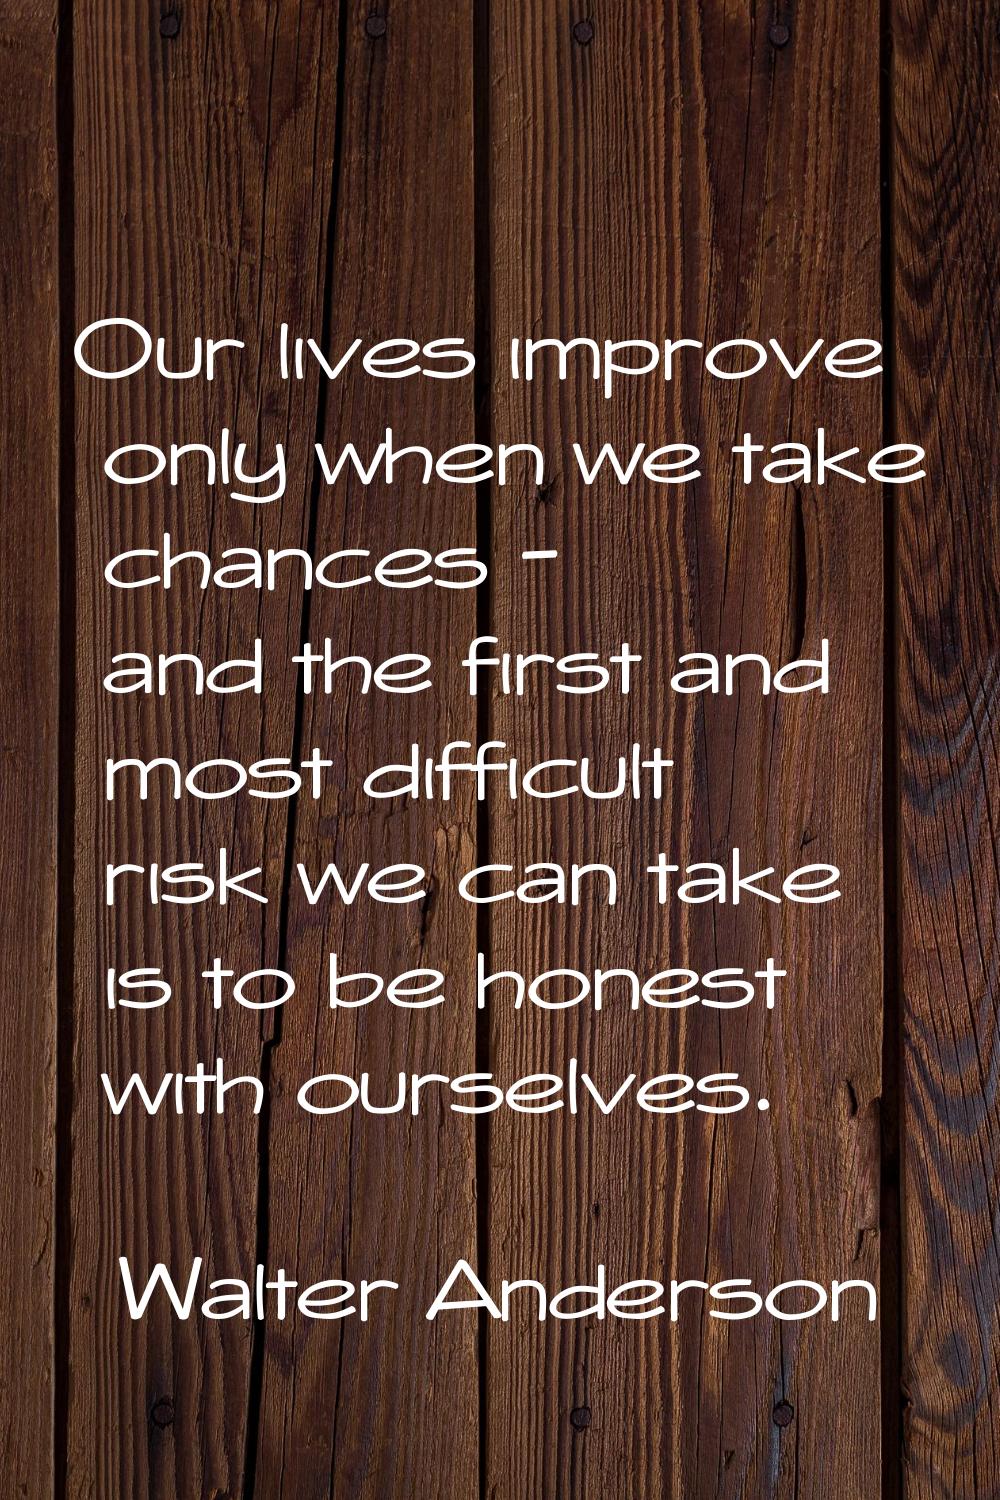 Our lives improve only when we take chances - and the first and most difficult risk we can take is 